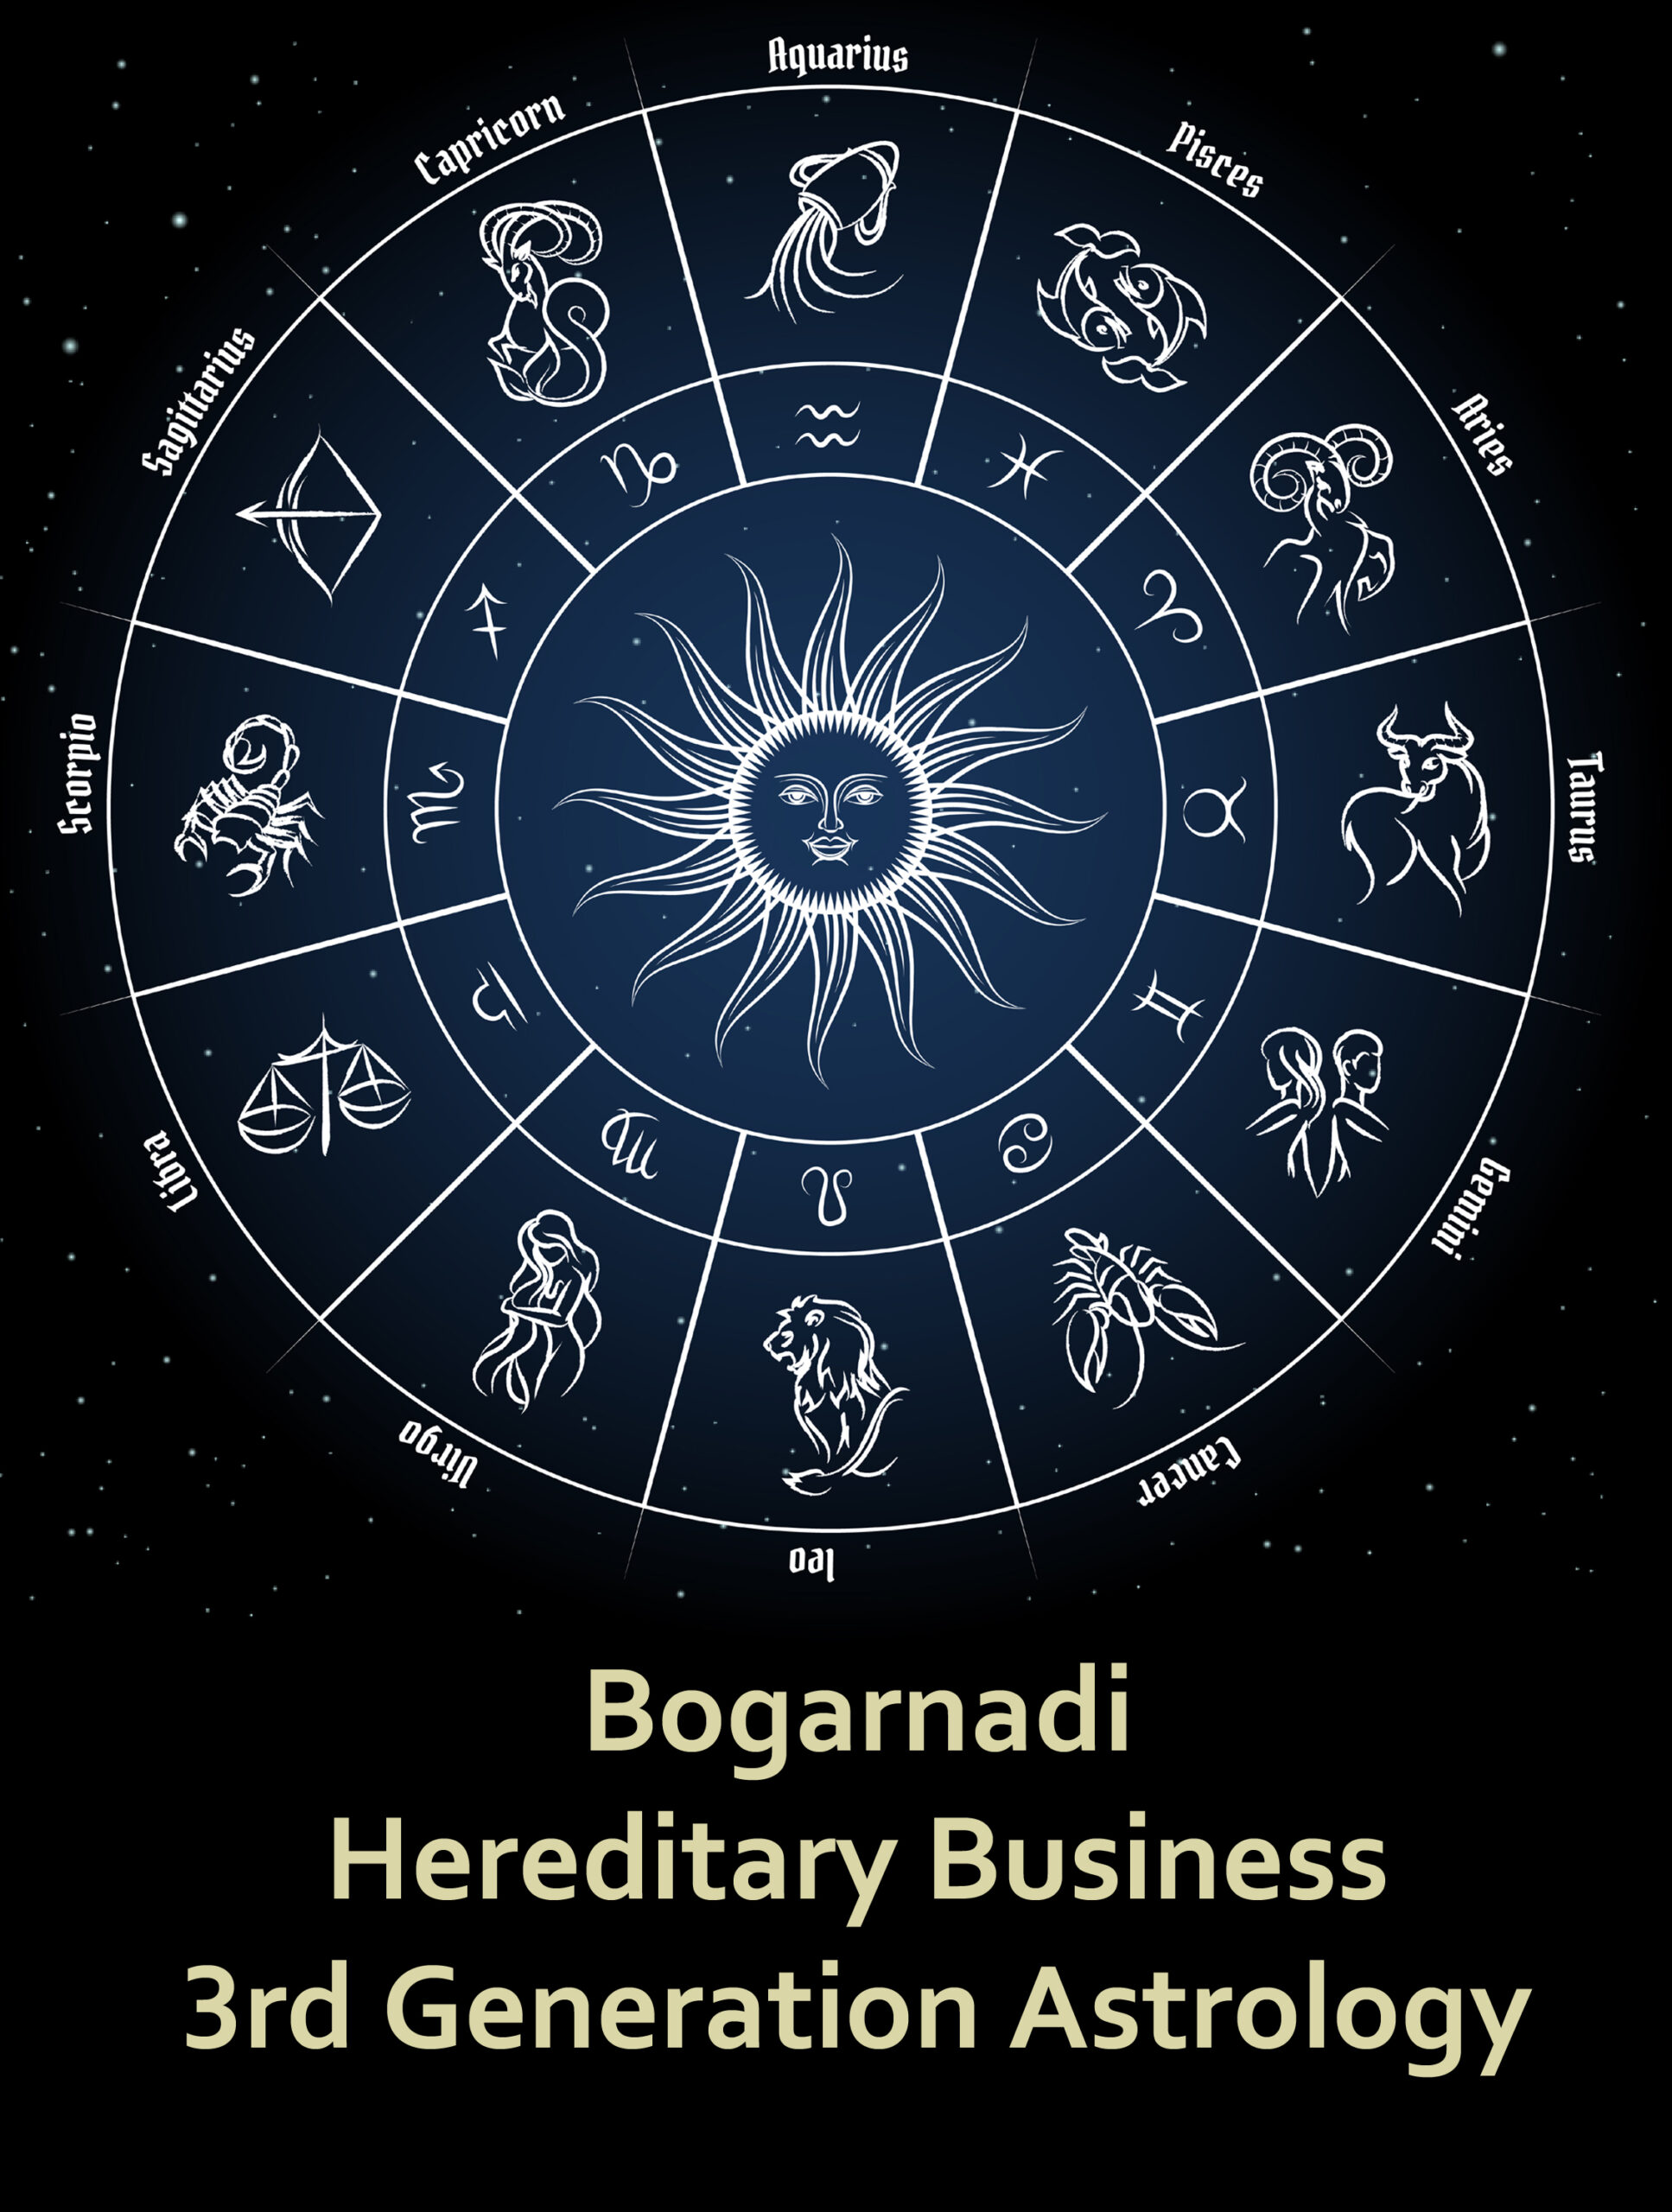 Hereditary business 3rd generation astrology